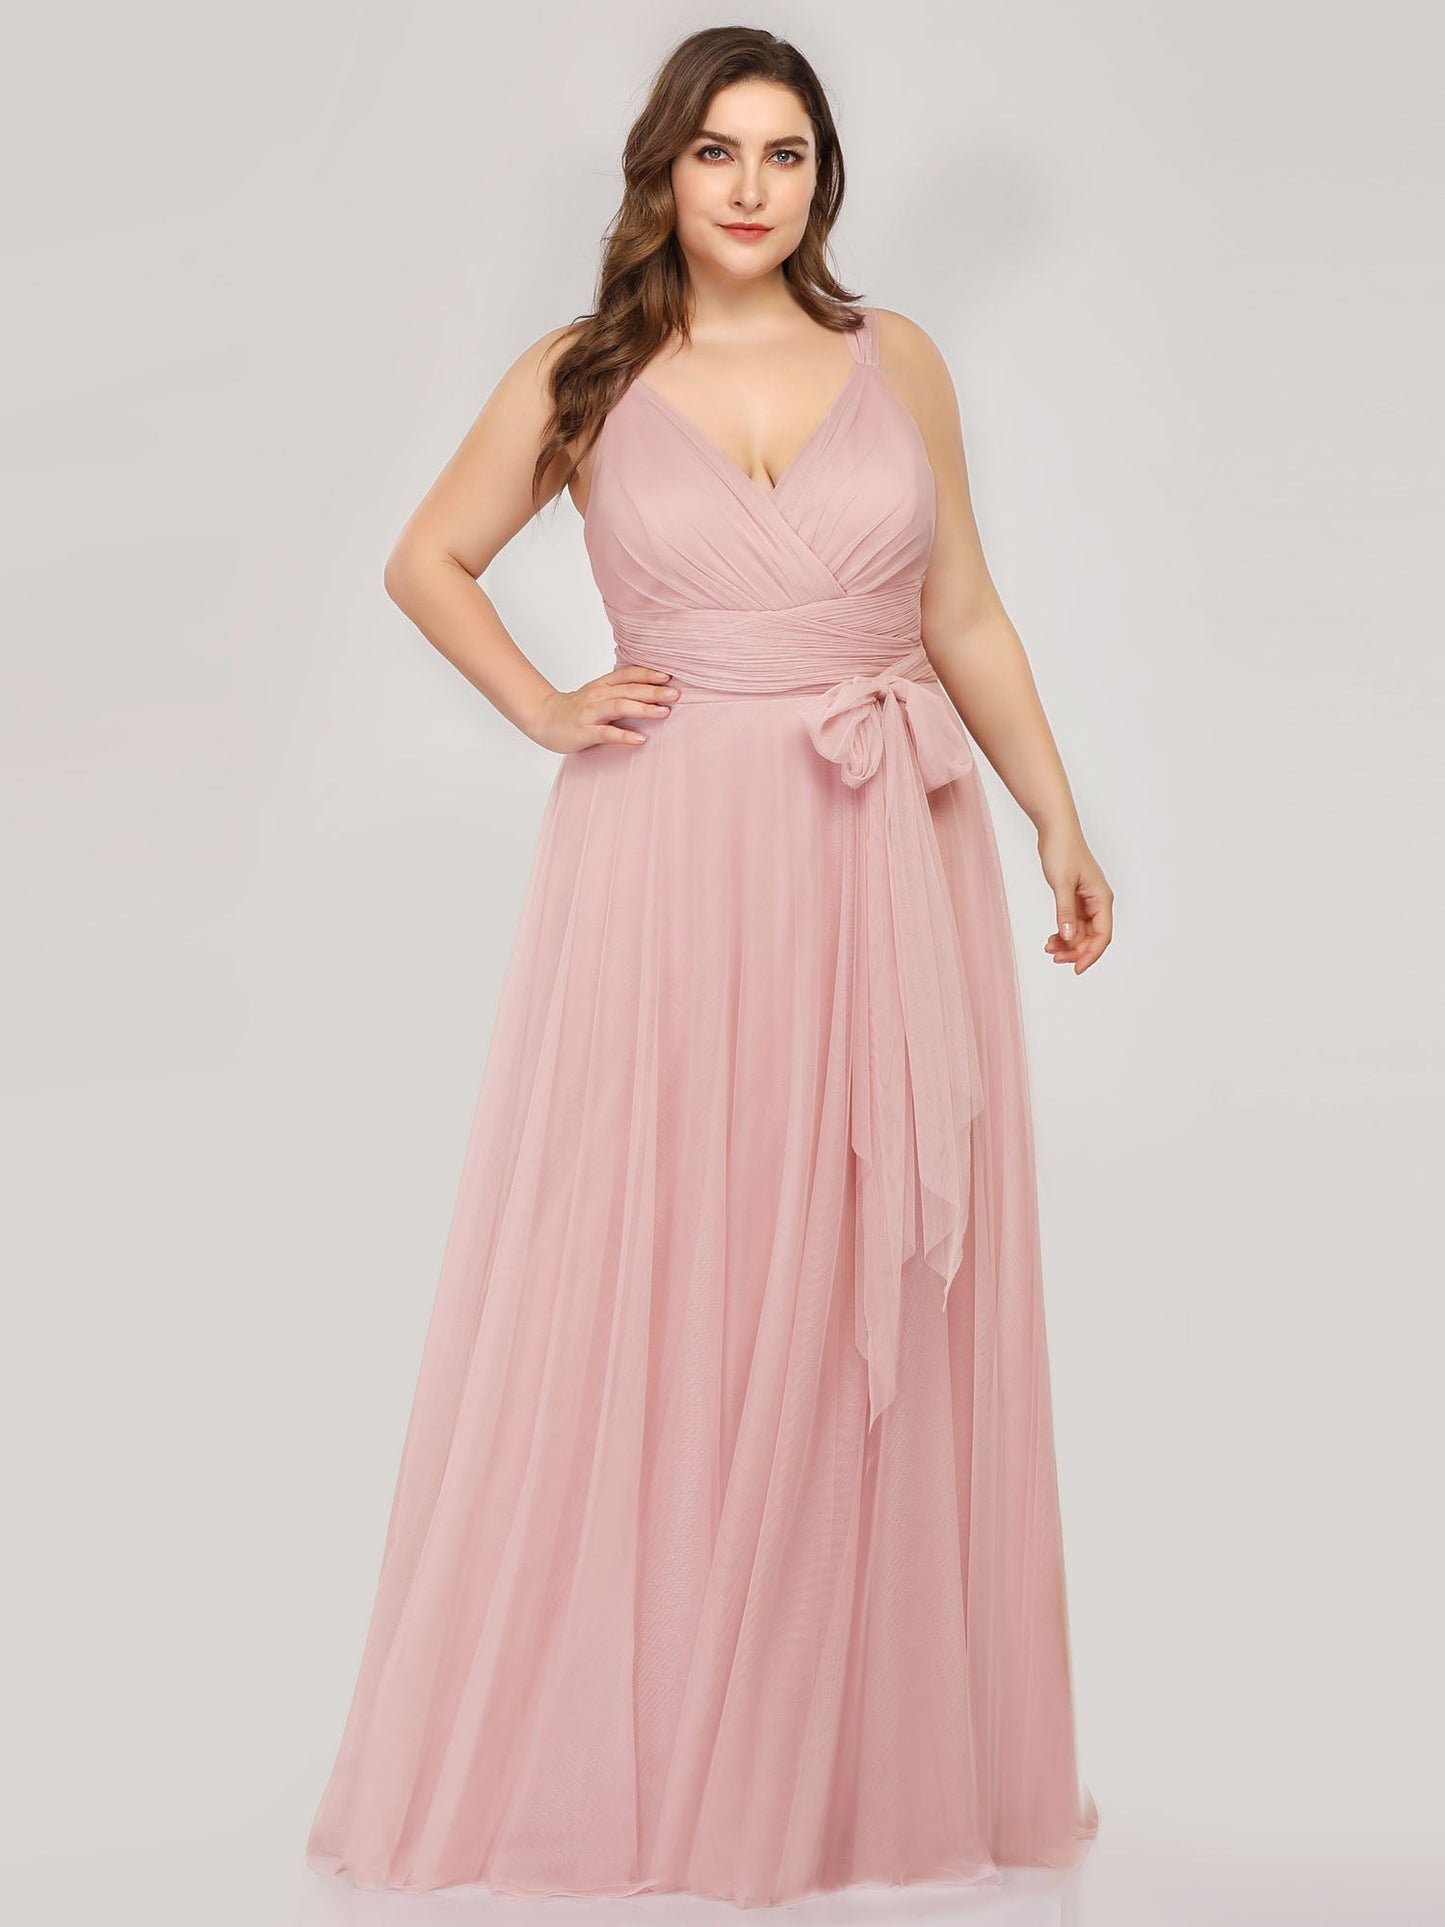 Enchanting Wholesale Plus Size Tulle Bridesmaid Gowns for Curvy Women